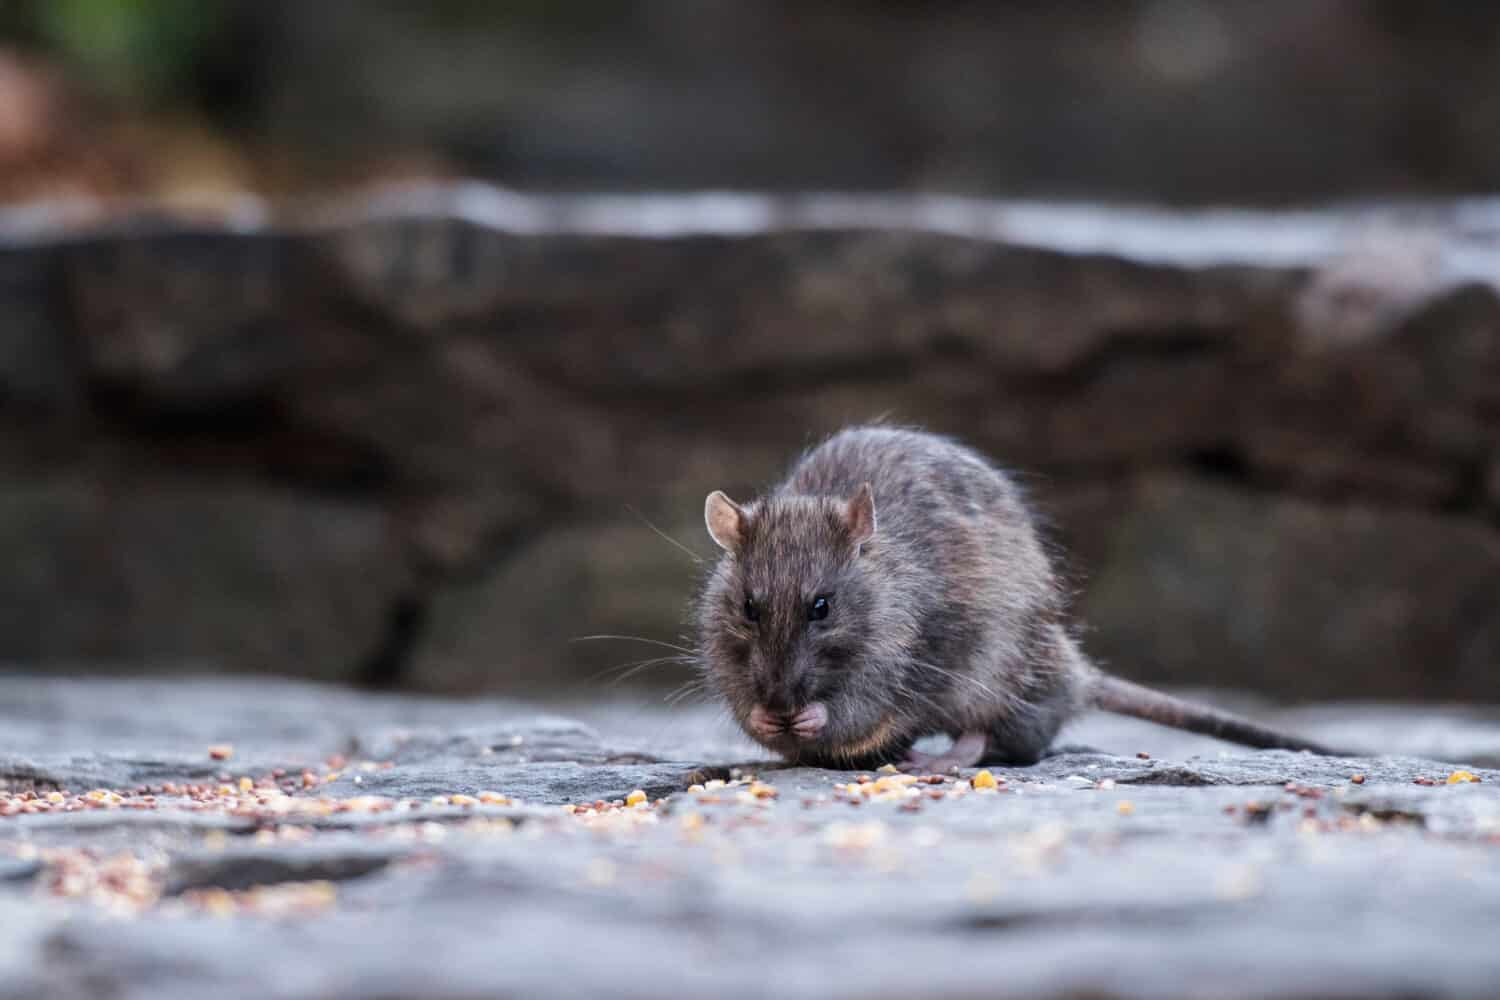 New York, United Stated; 11 23 2017: Rat seen eating seeds in Central Park